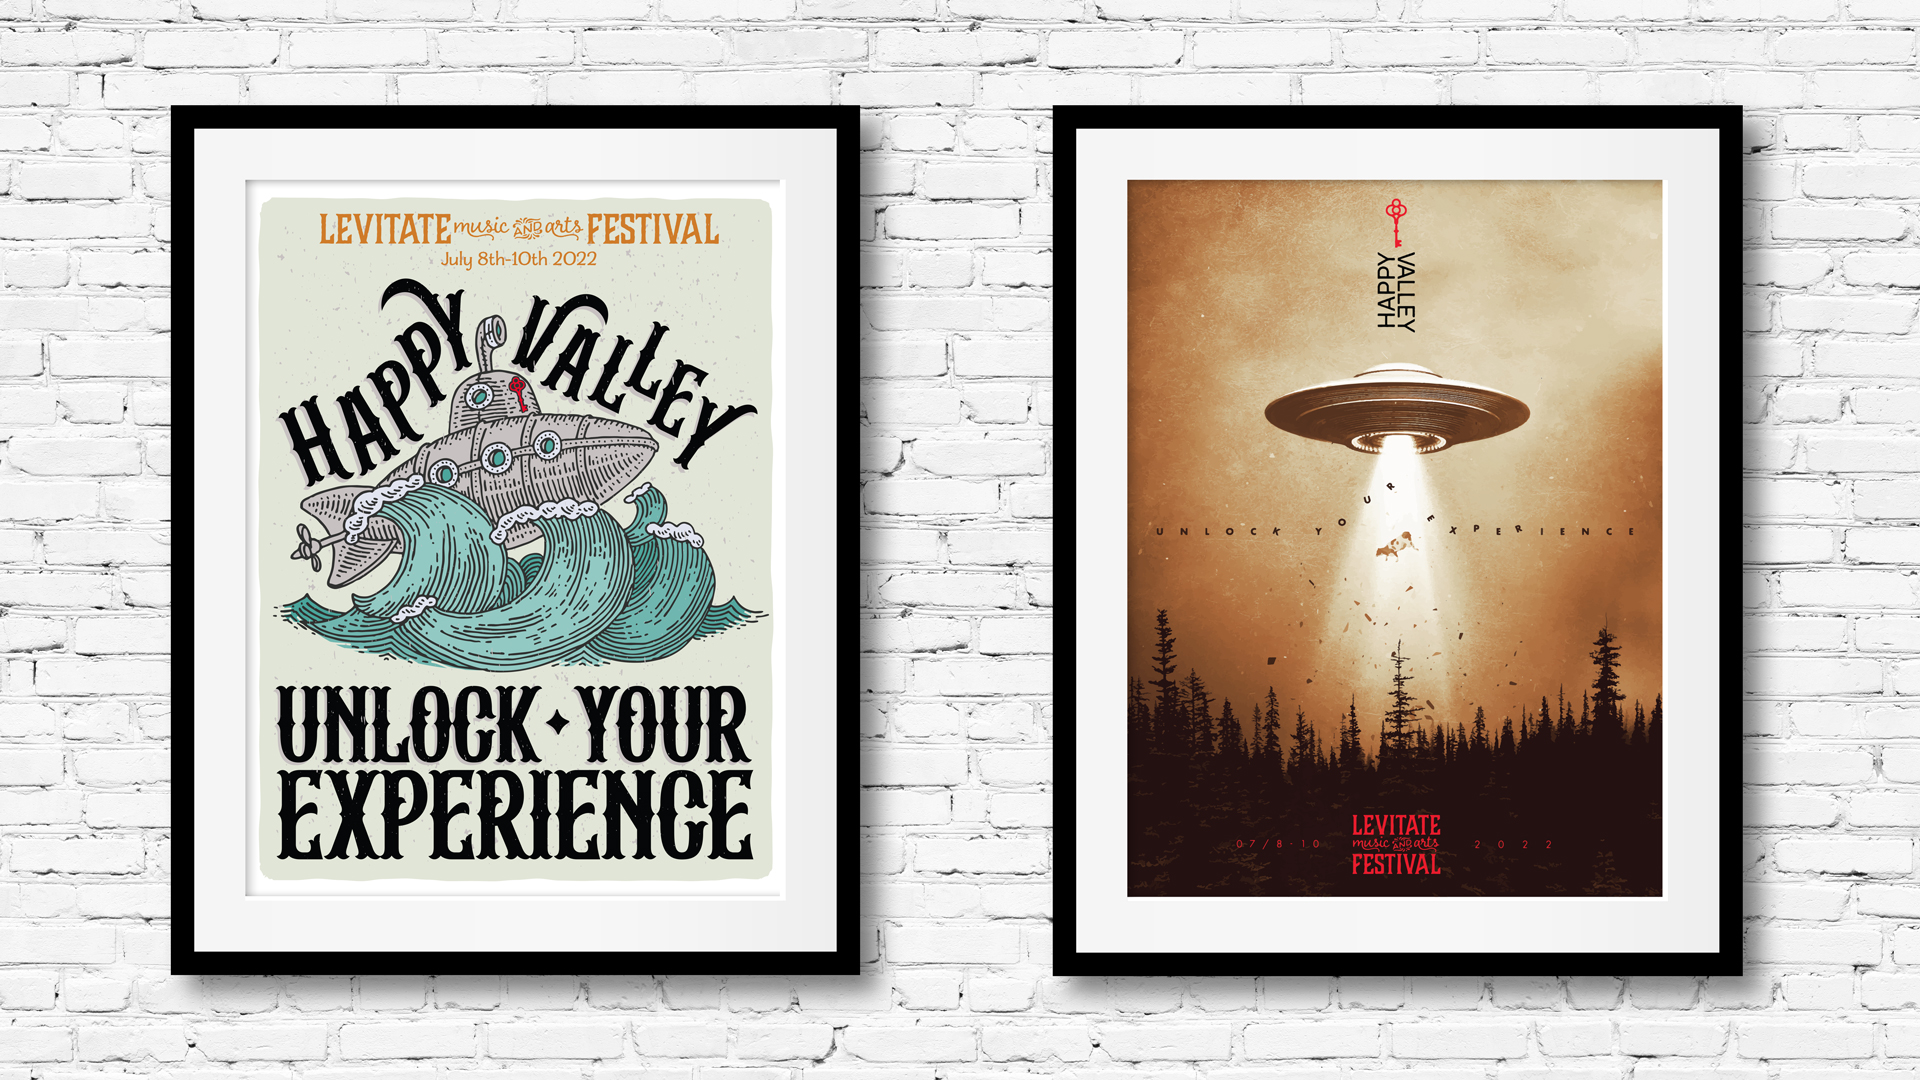 Submarine and UFO abduction posters from Happy Valley